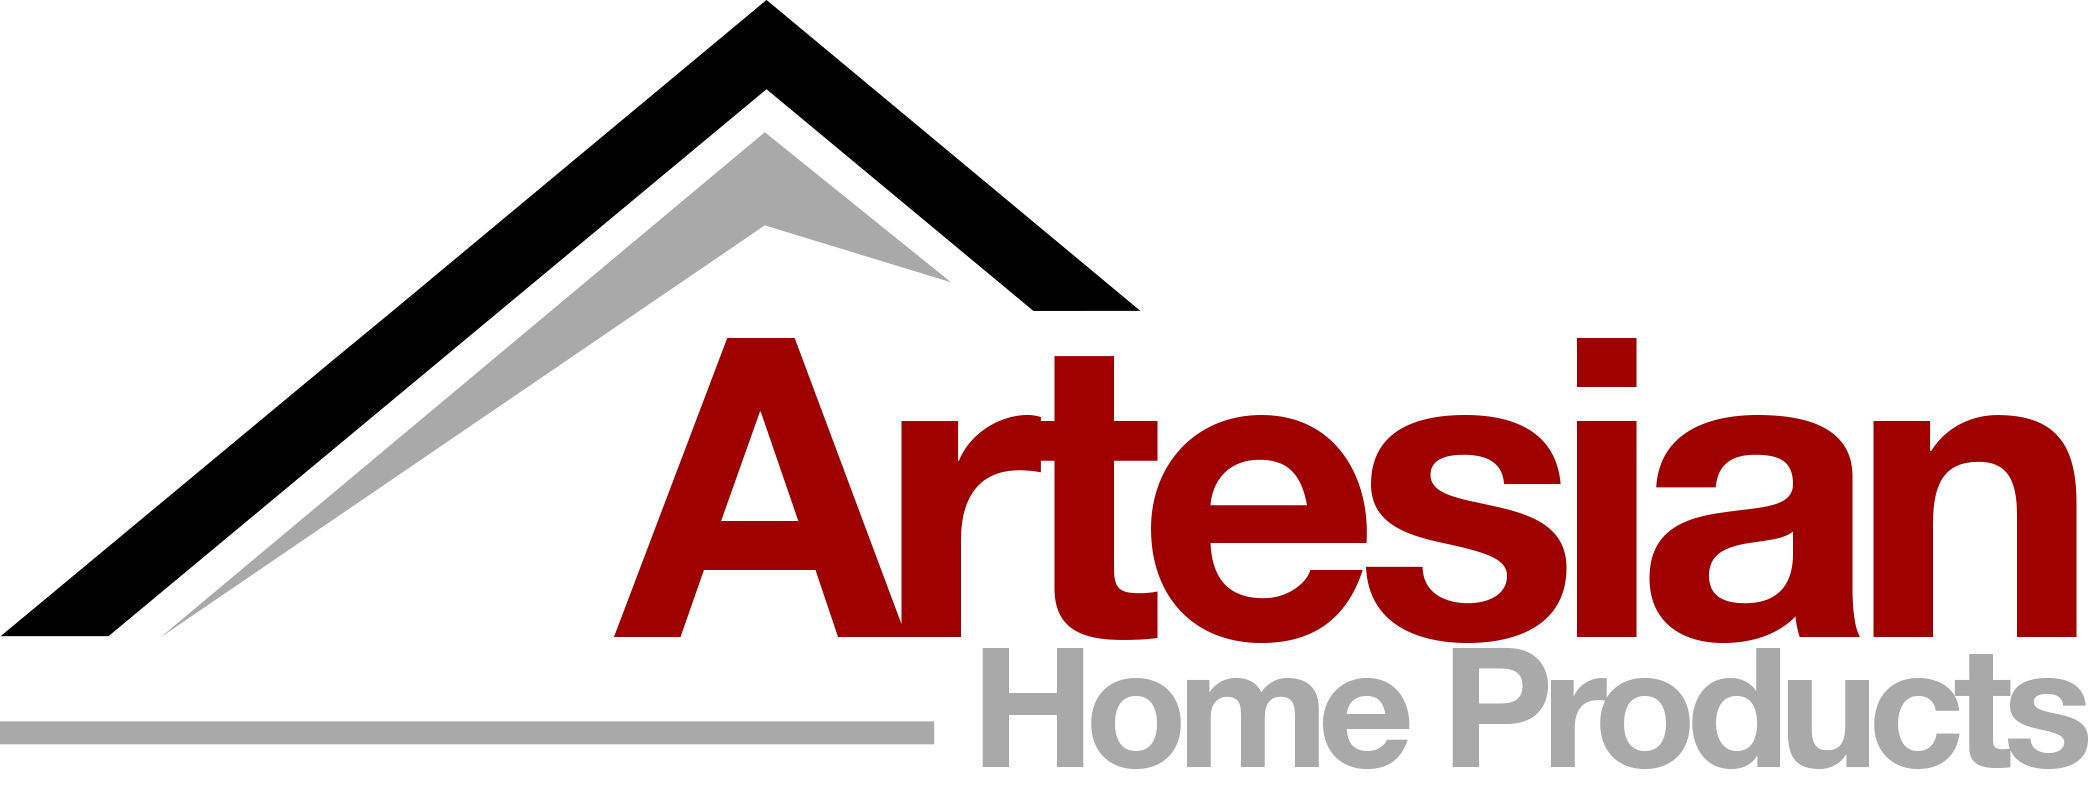 Artesian Home Products